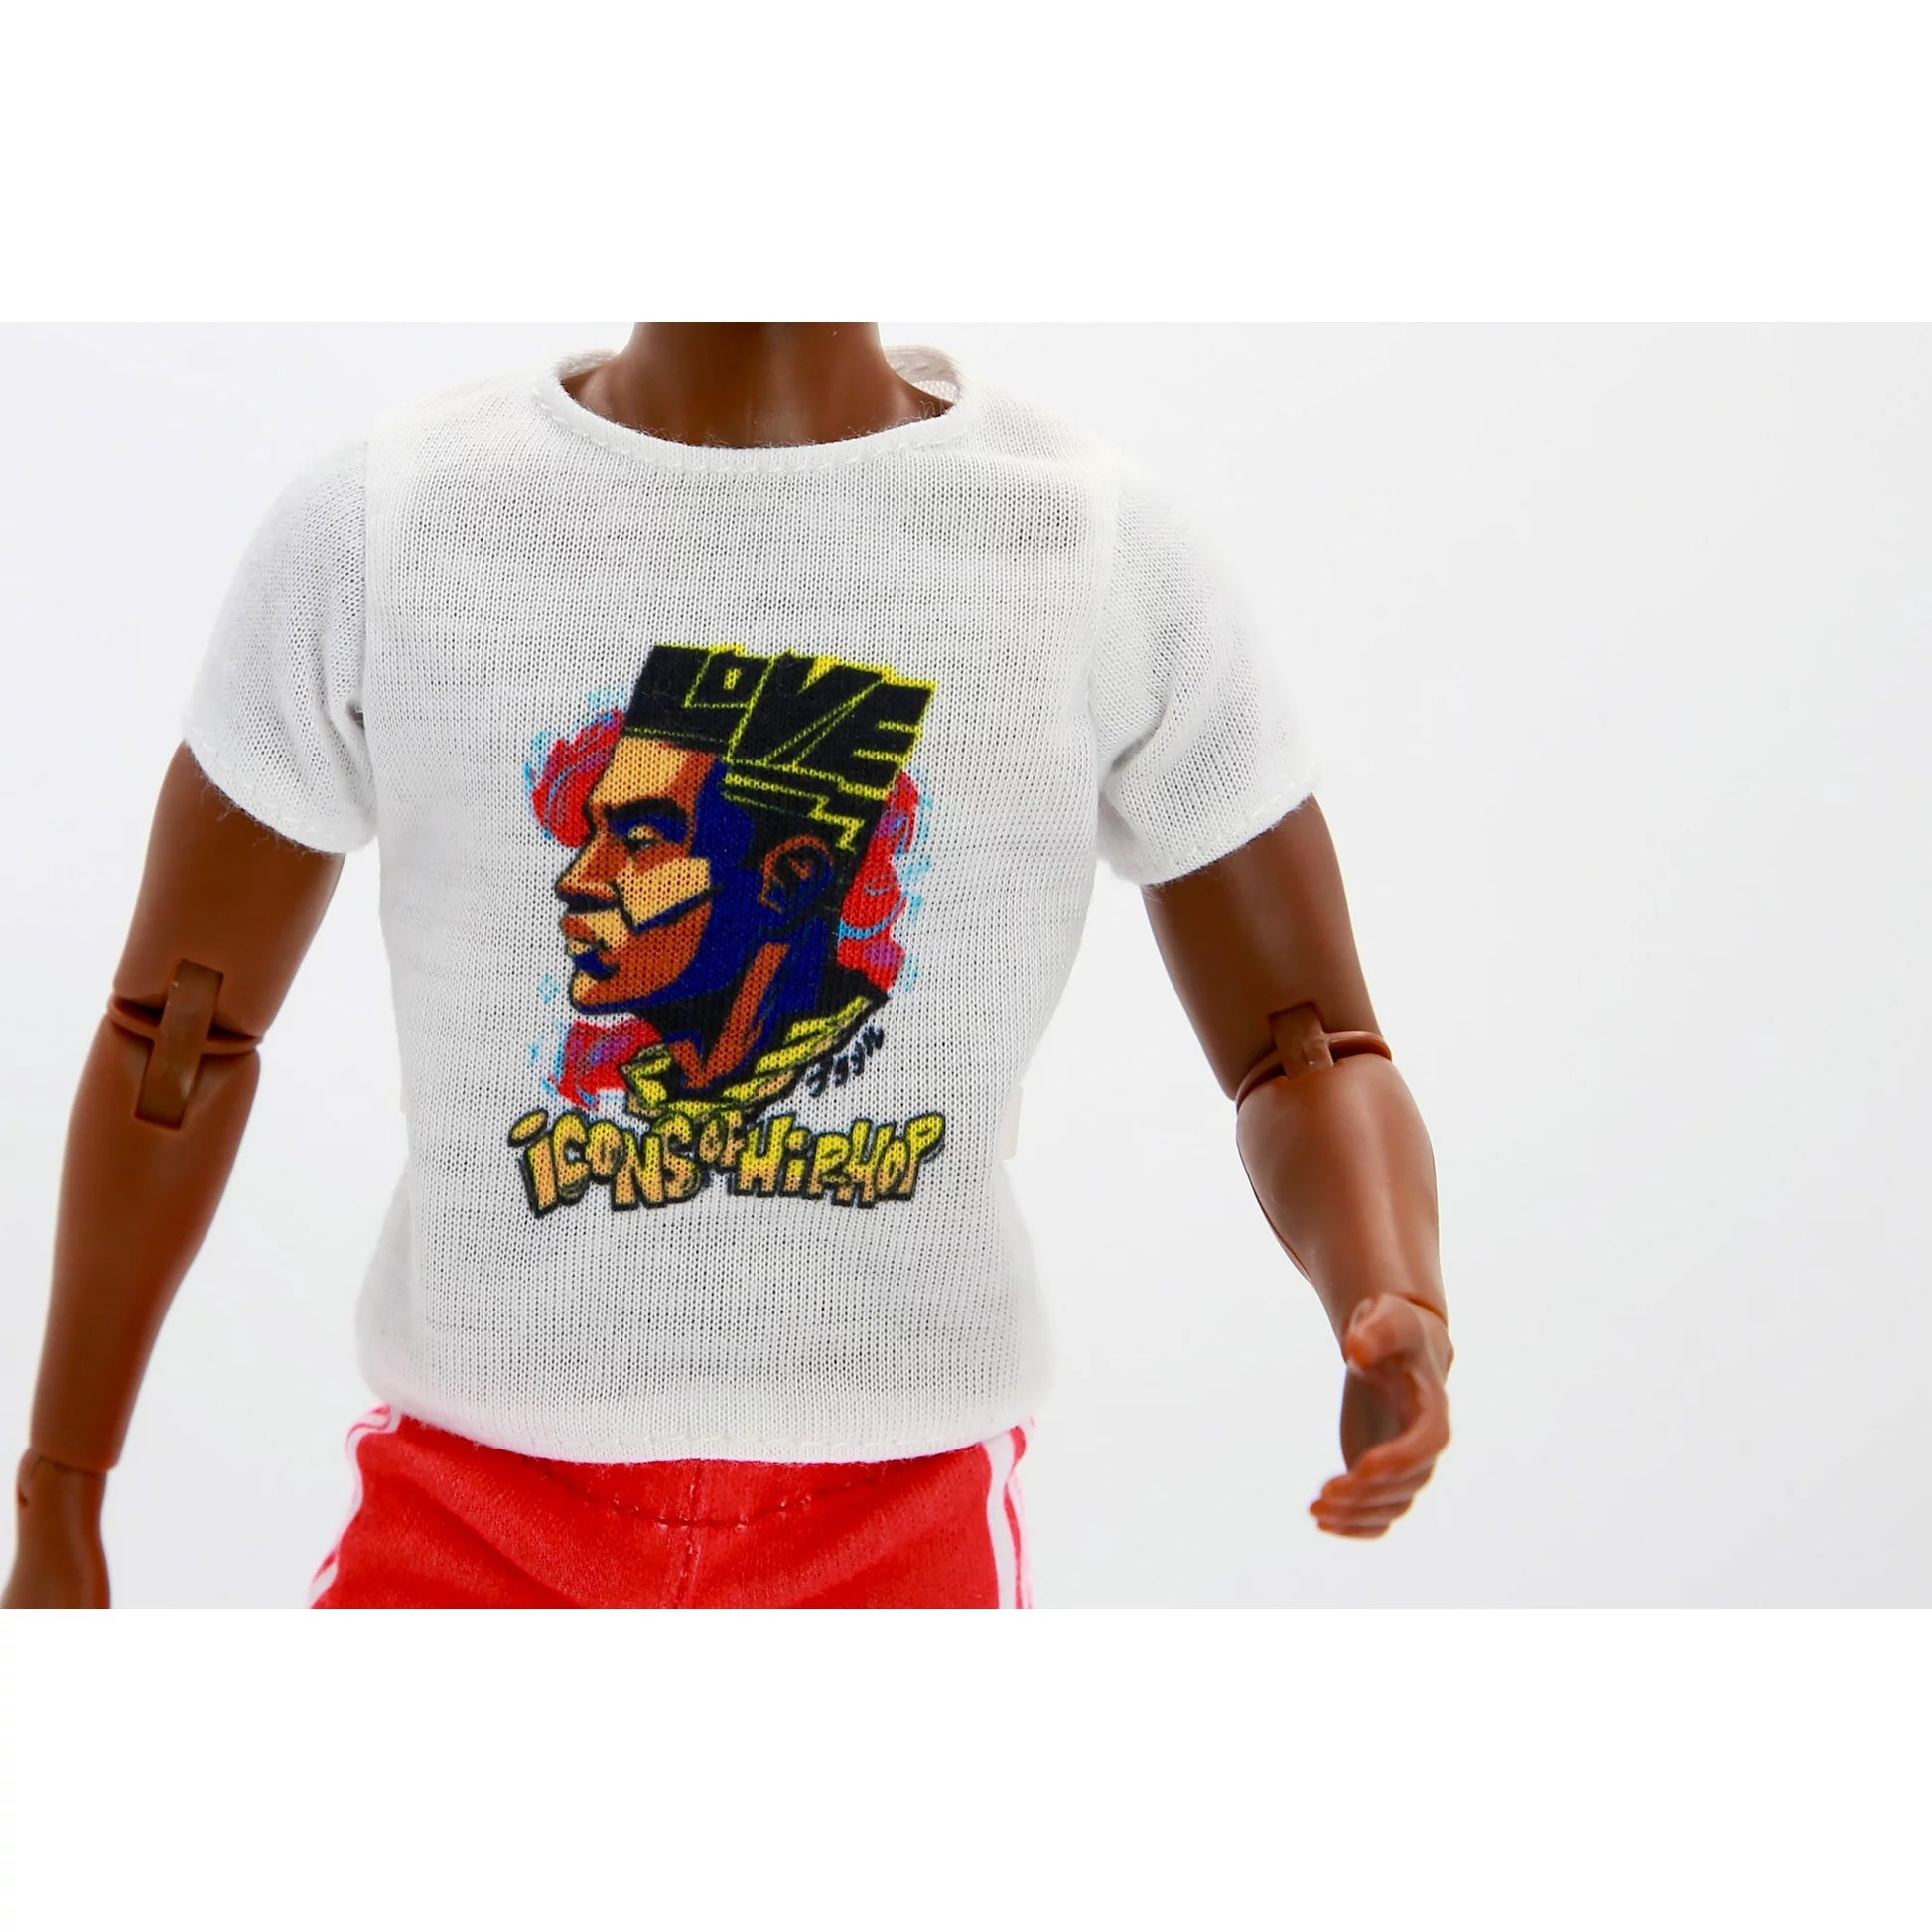 Anthony in Icons of Hip-Hop Tee